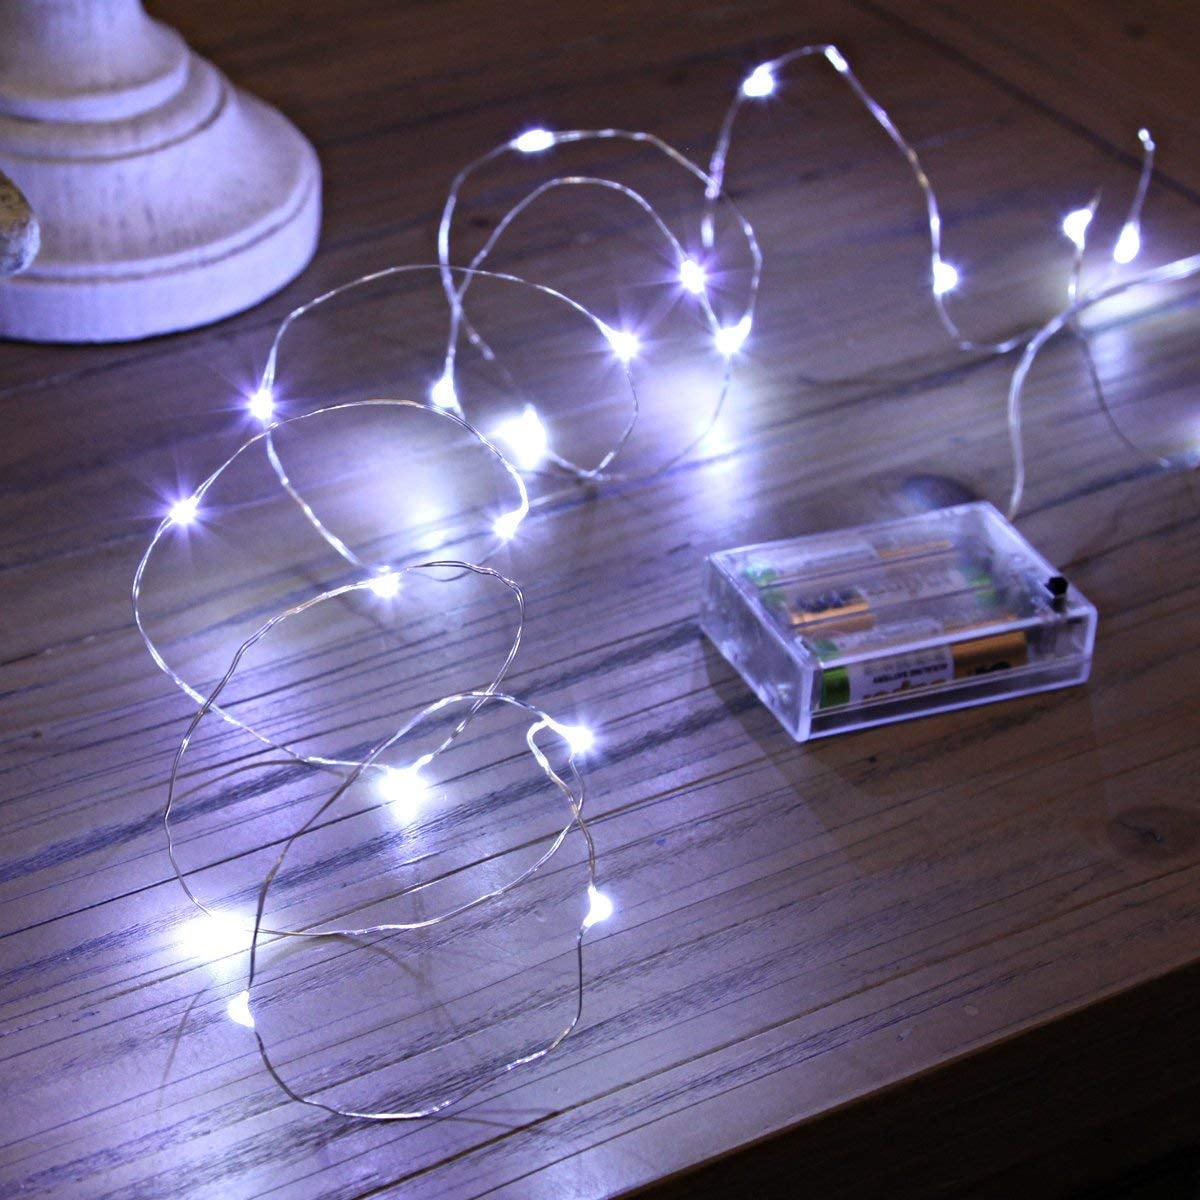 20 30 LED Micro Copper Wire String Battery Powered Fairy Light Party Decor GL325 